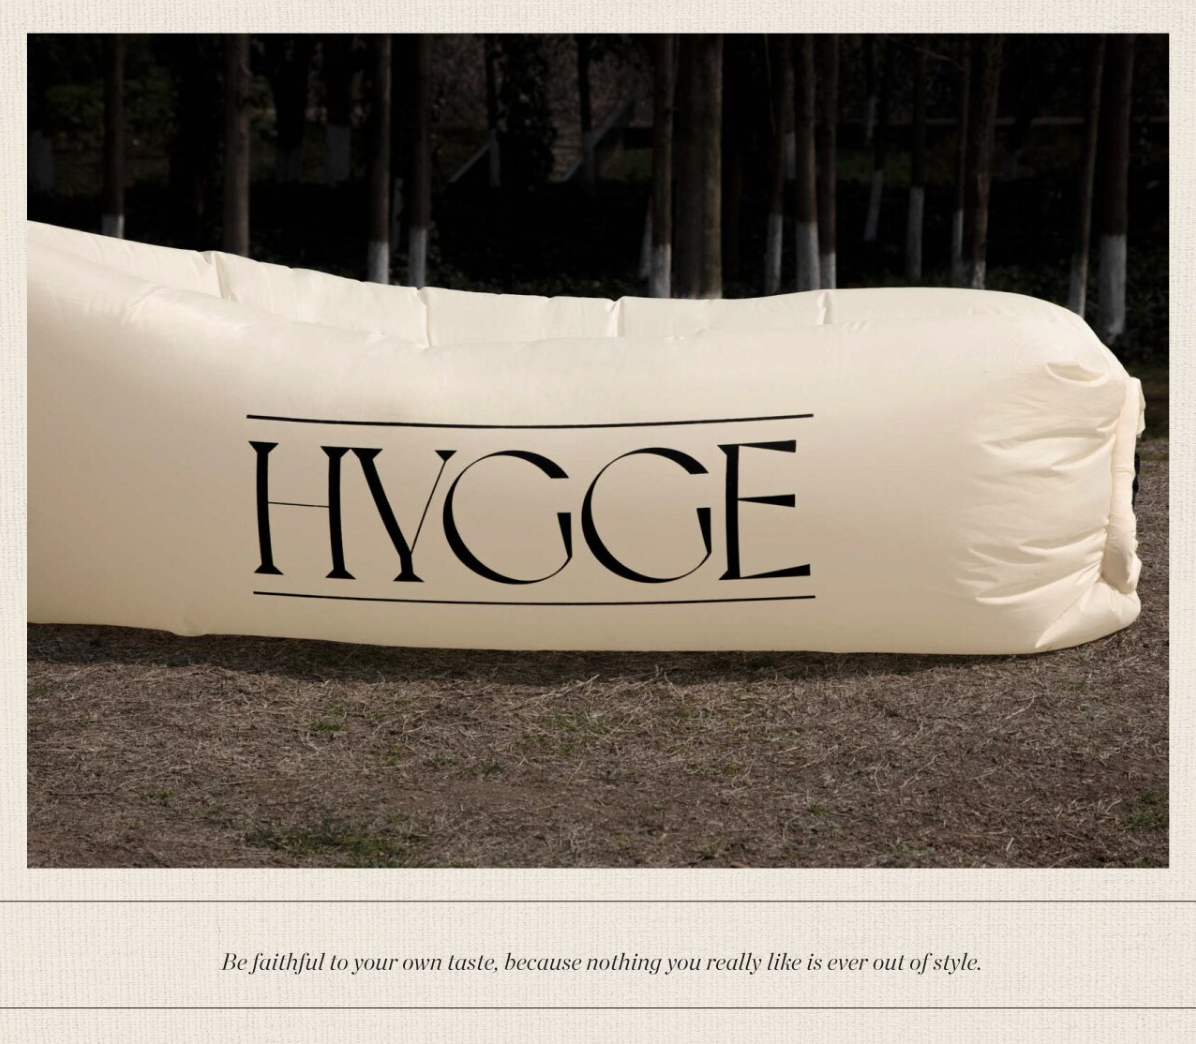 Hygge style cream white color tone waterproof Oxford cloth inflatable portable camping air couch and chair, by A Bit Sleepy homeware concept store